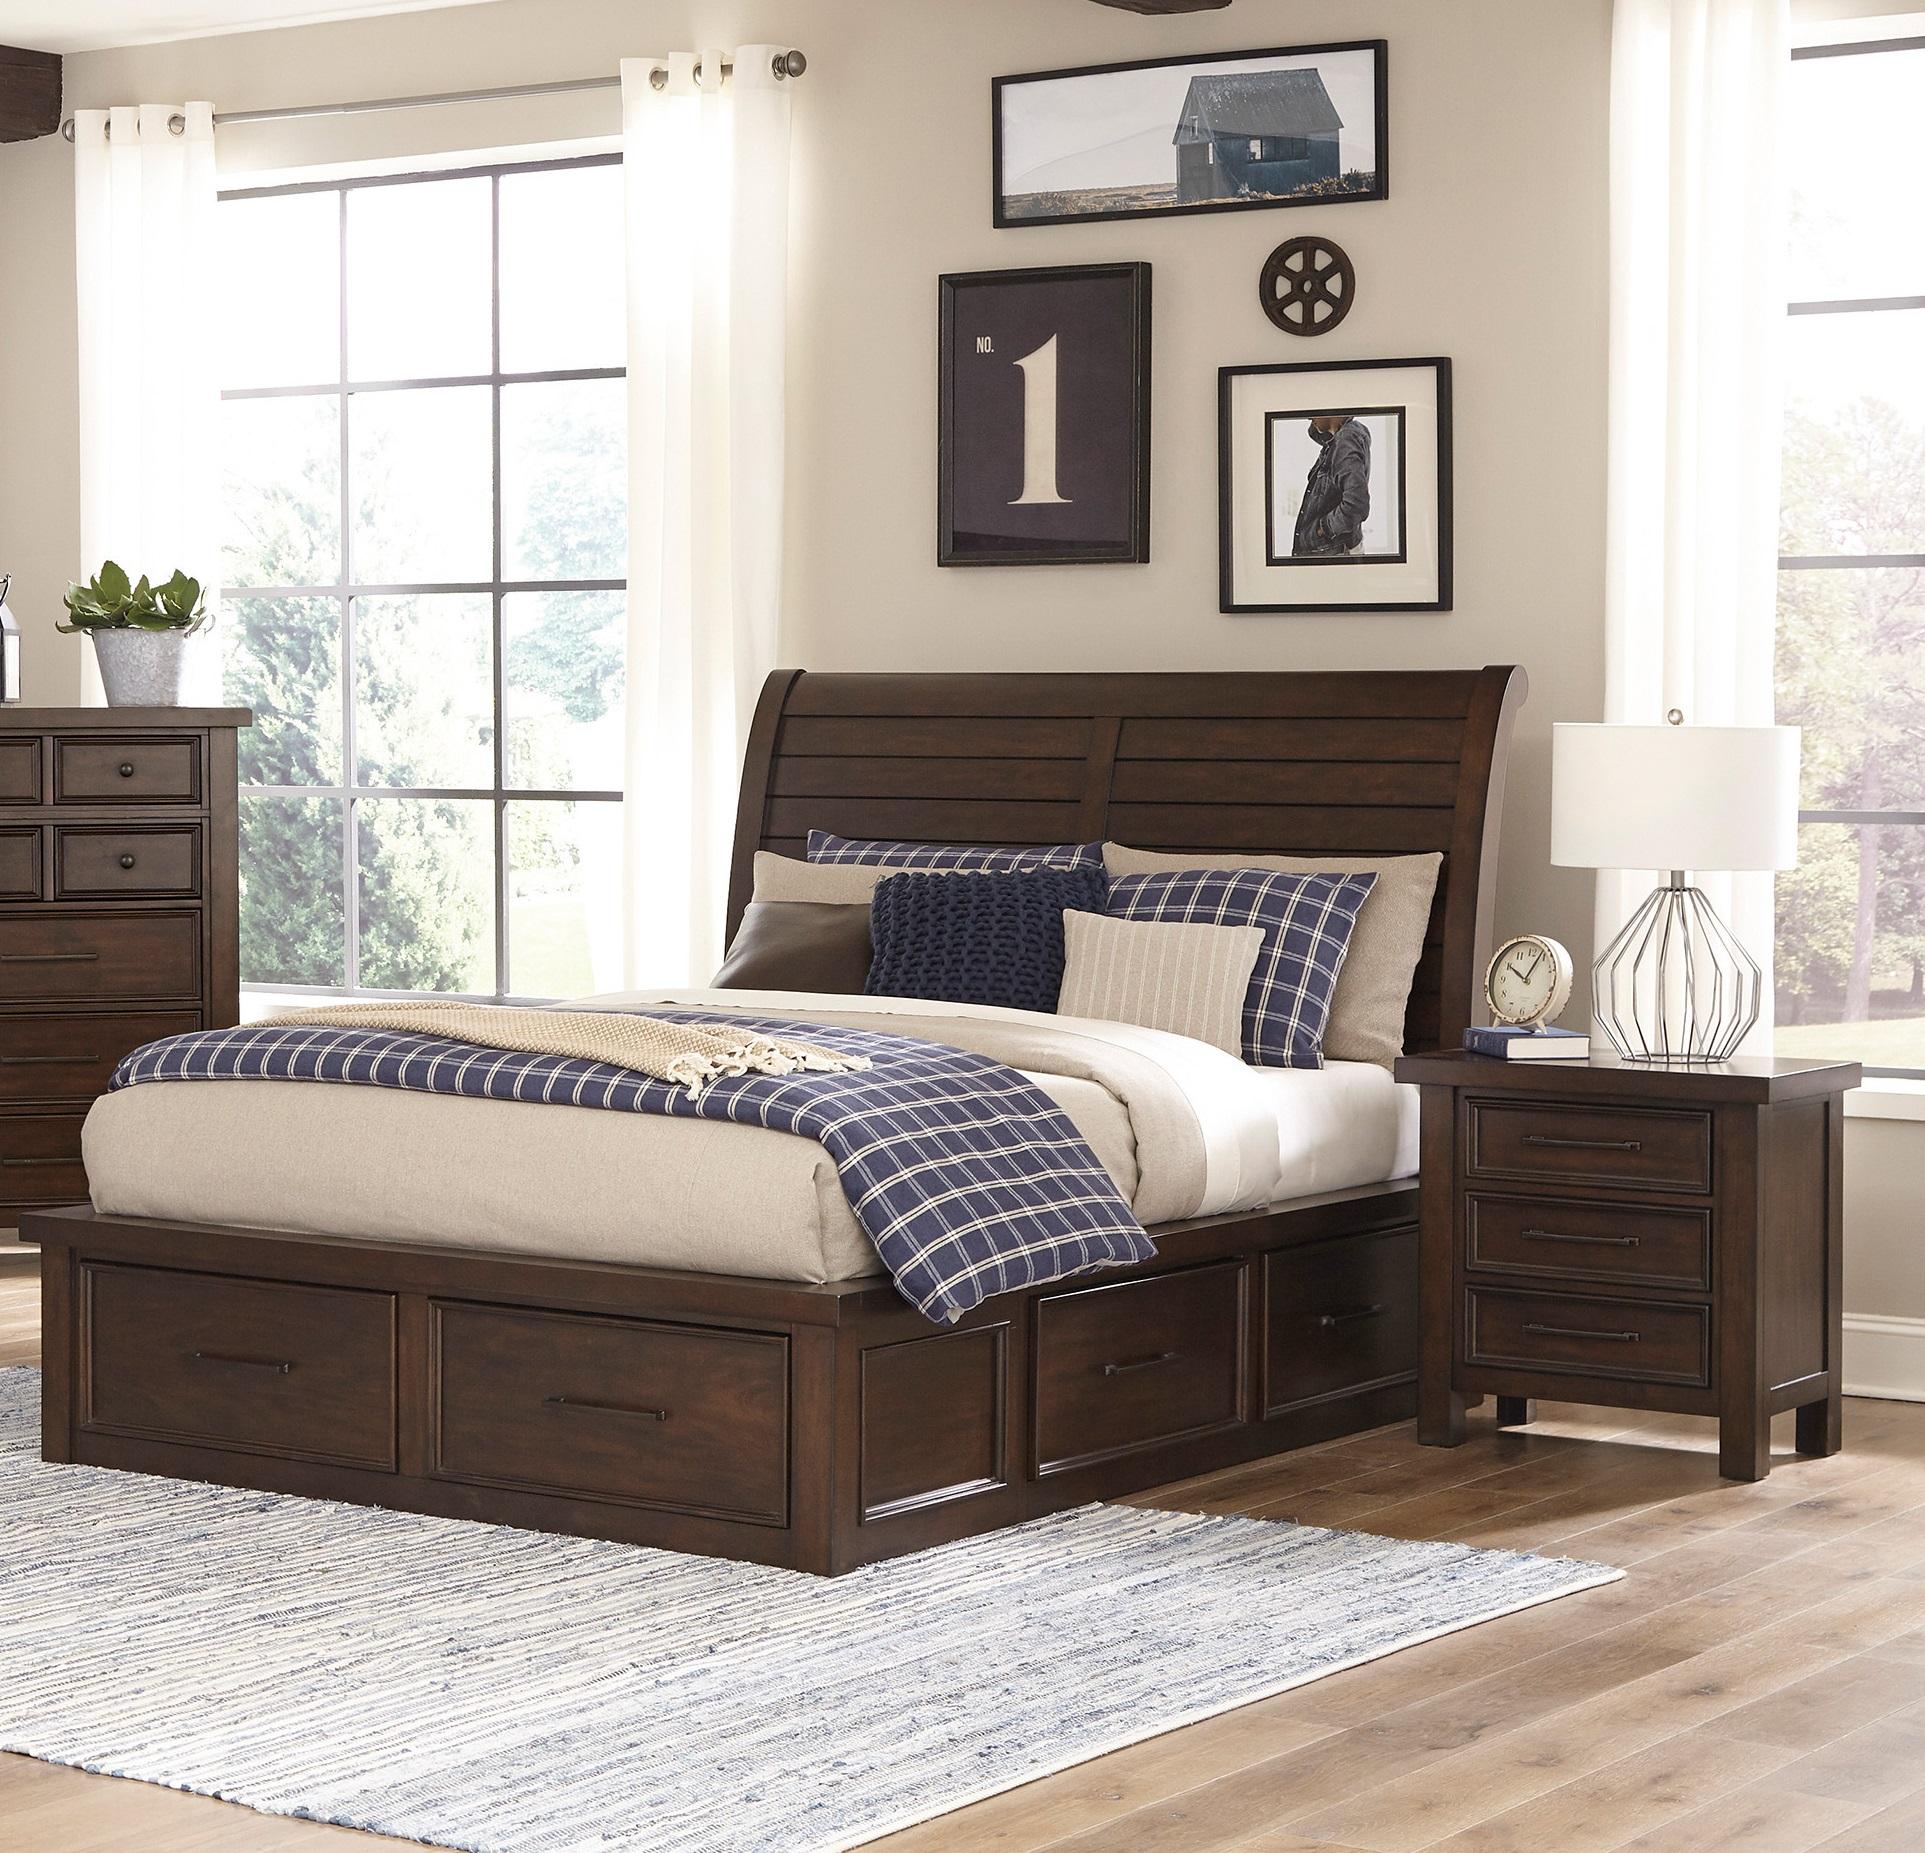 Transitional Bedroom Set 1559-1-3PC Logandale 1559-1-3PC in Brown 